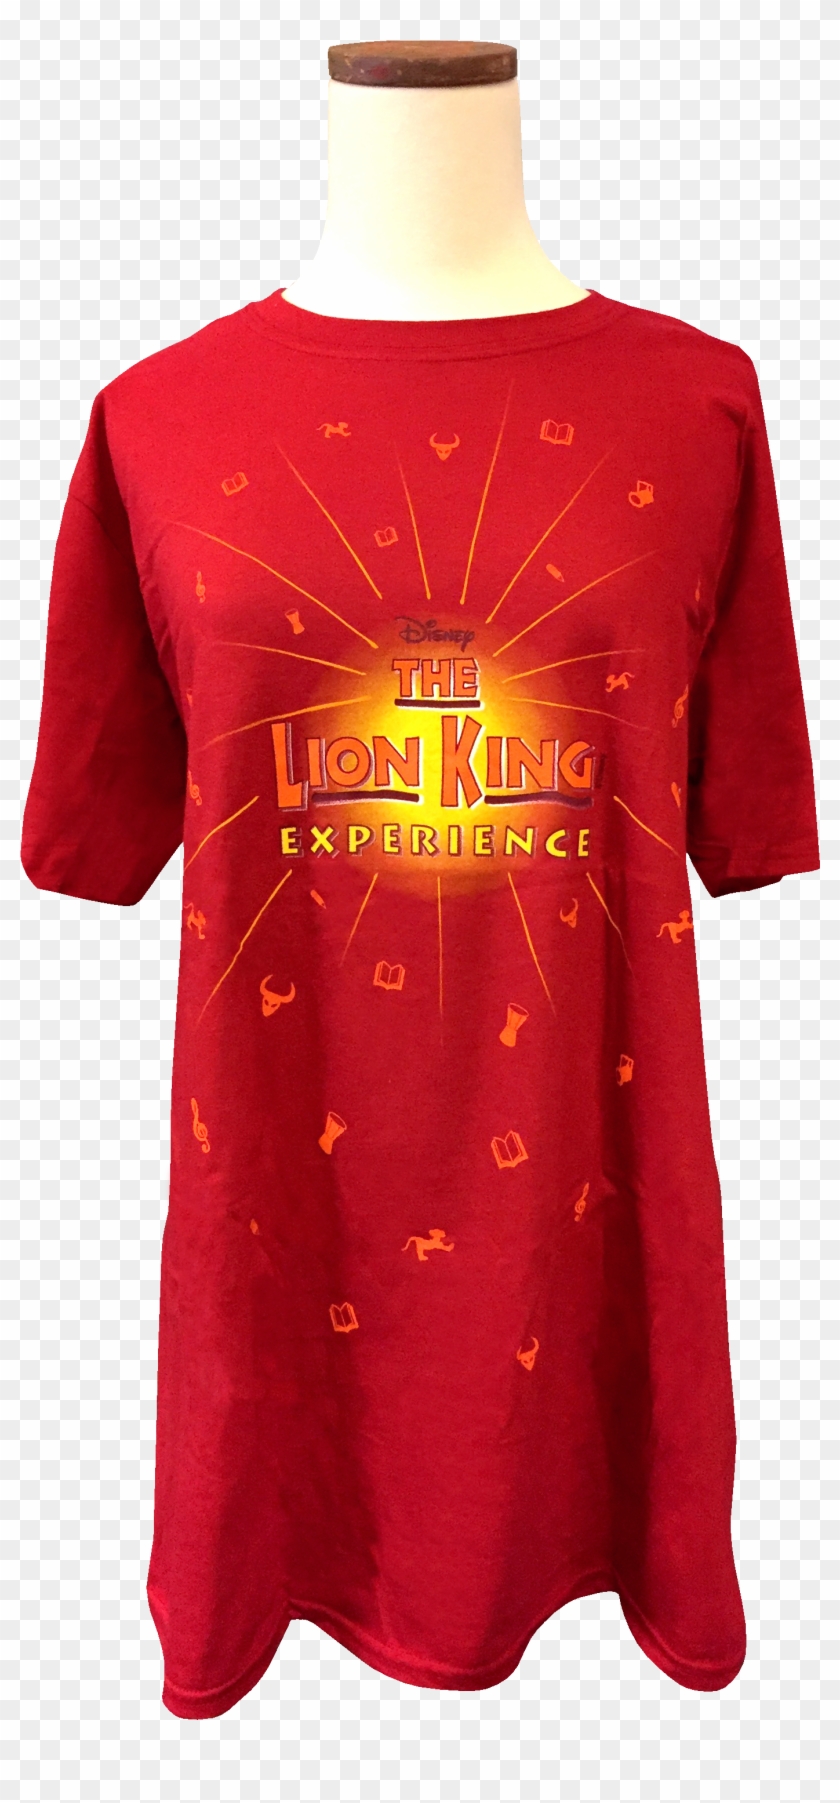 The Official Lion King Experience Logo T Shirt For - Active Shirt Clipart